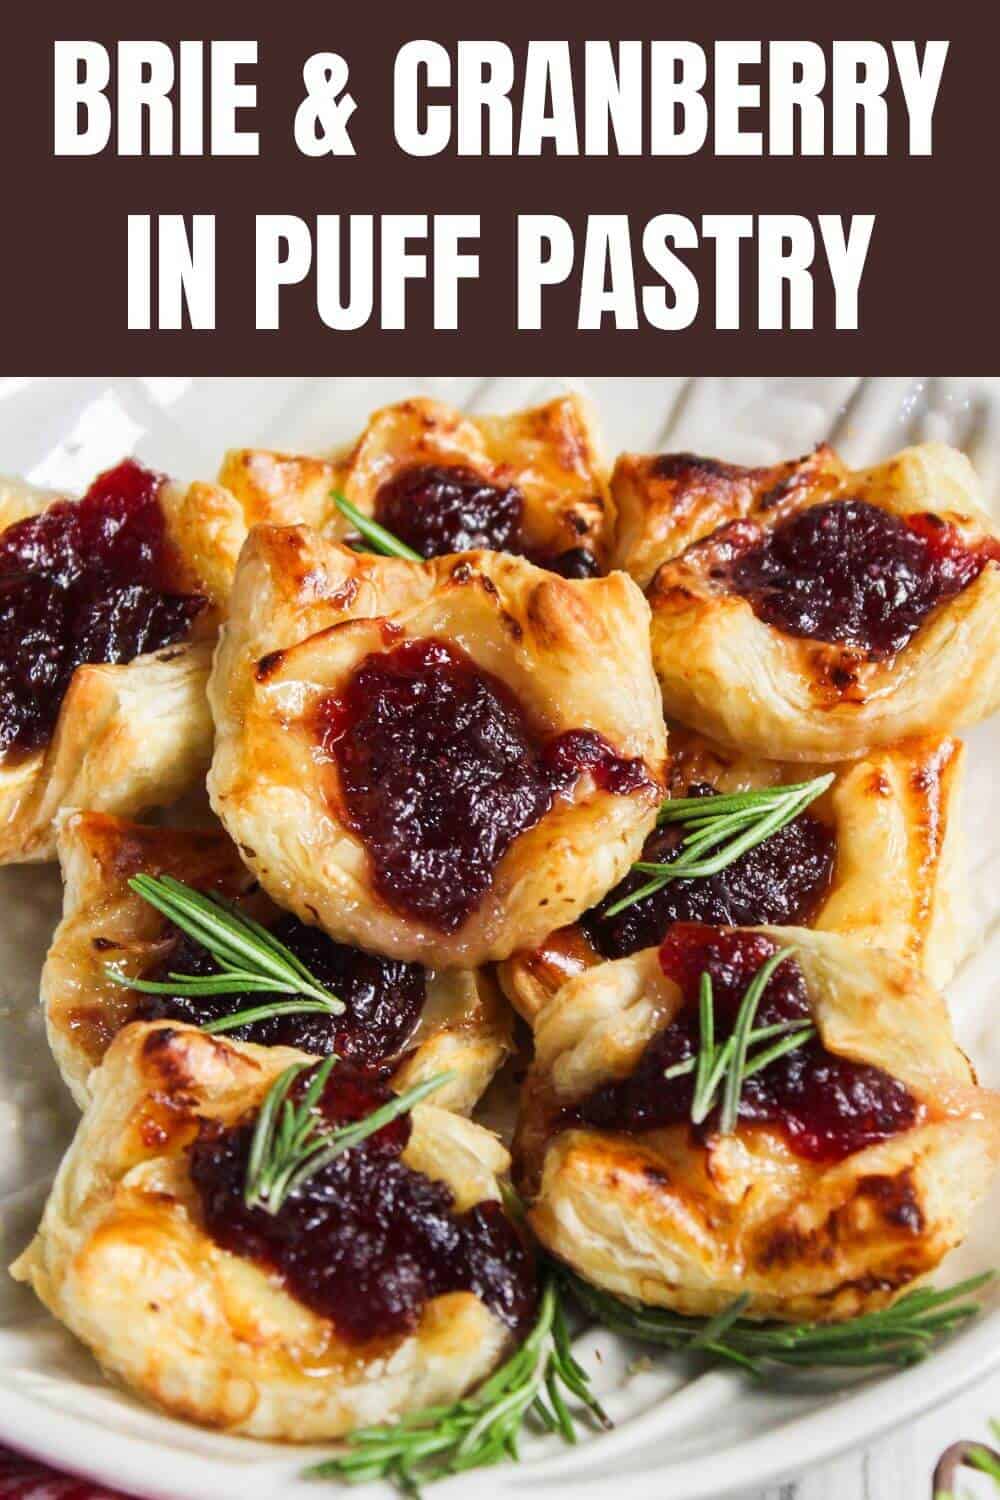 Brie and cranberry puff pastry.